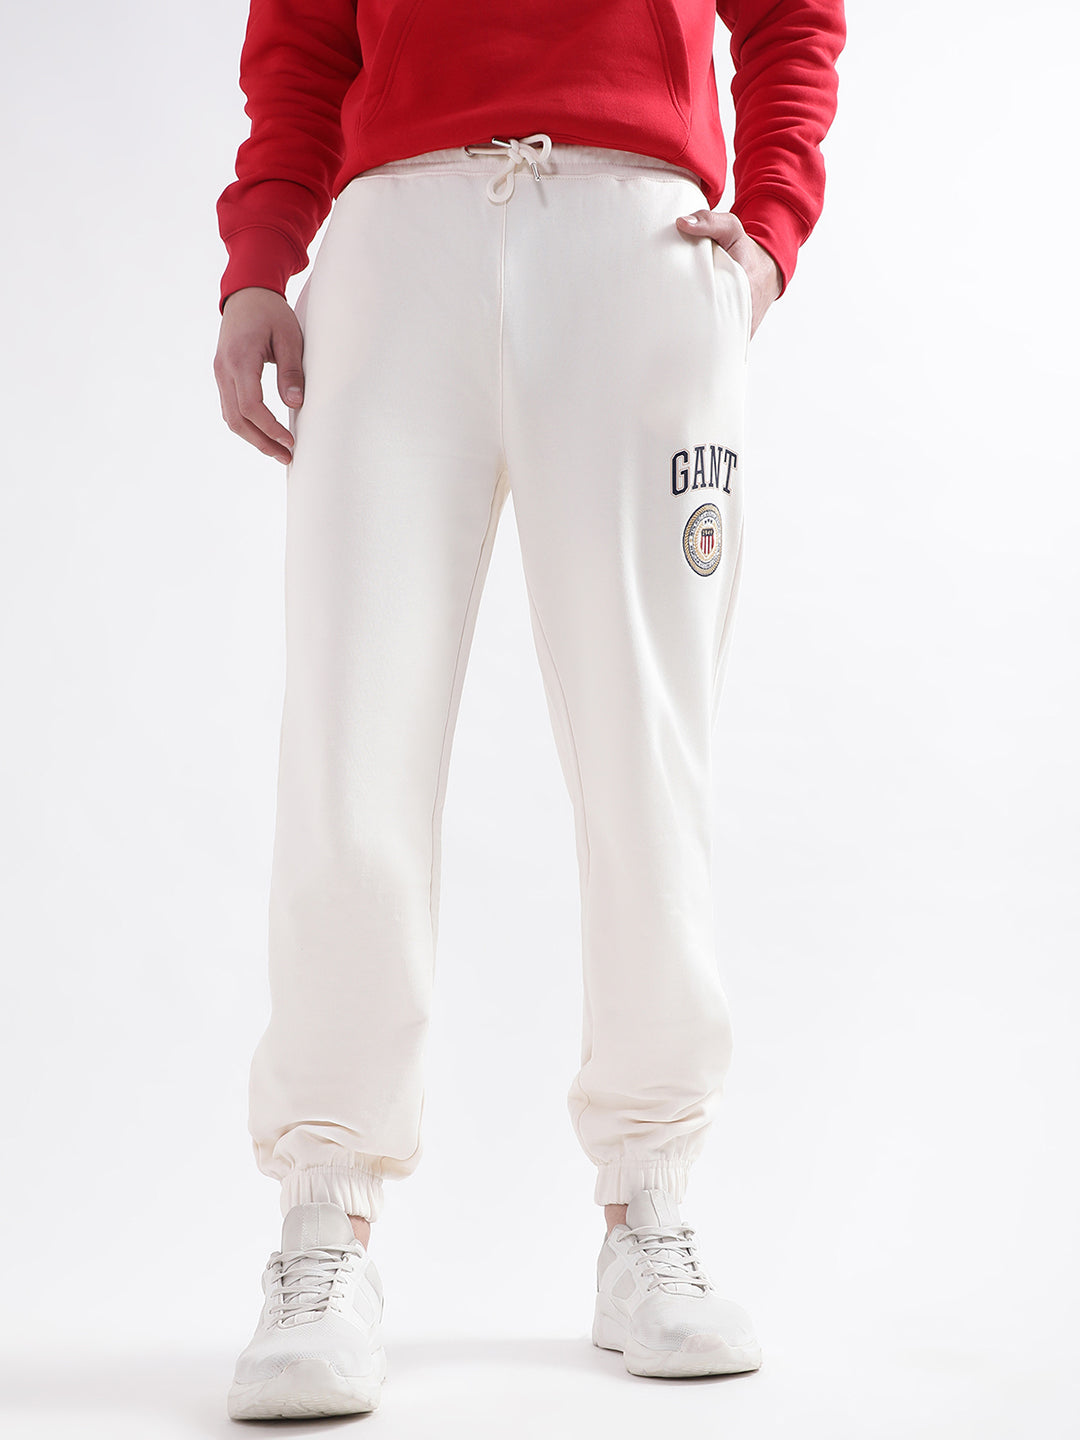 Gant Women Brand Logo Printed Relaxed-Fit Cotton Joggers